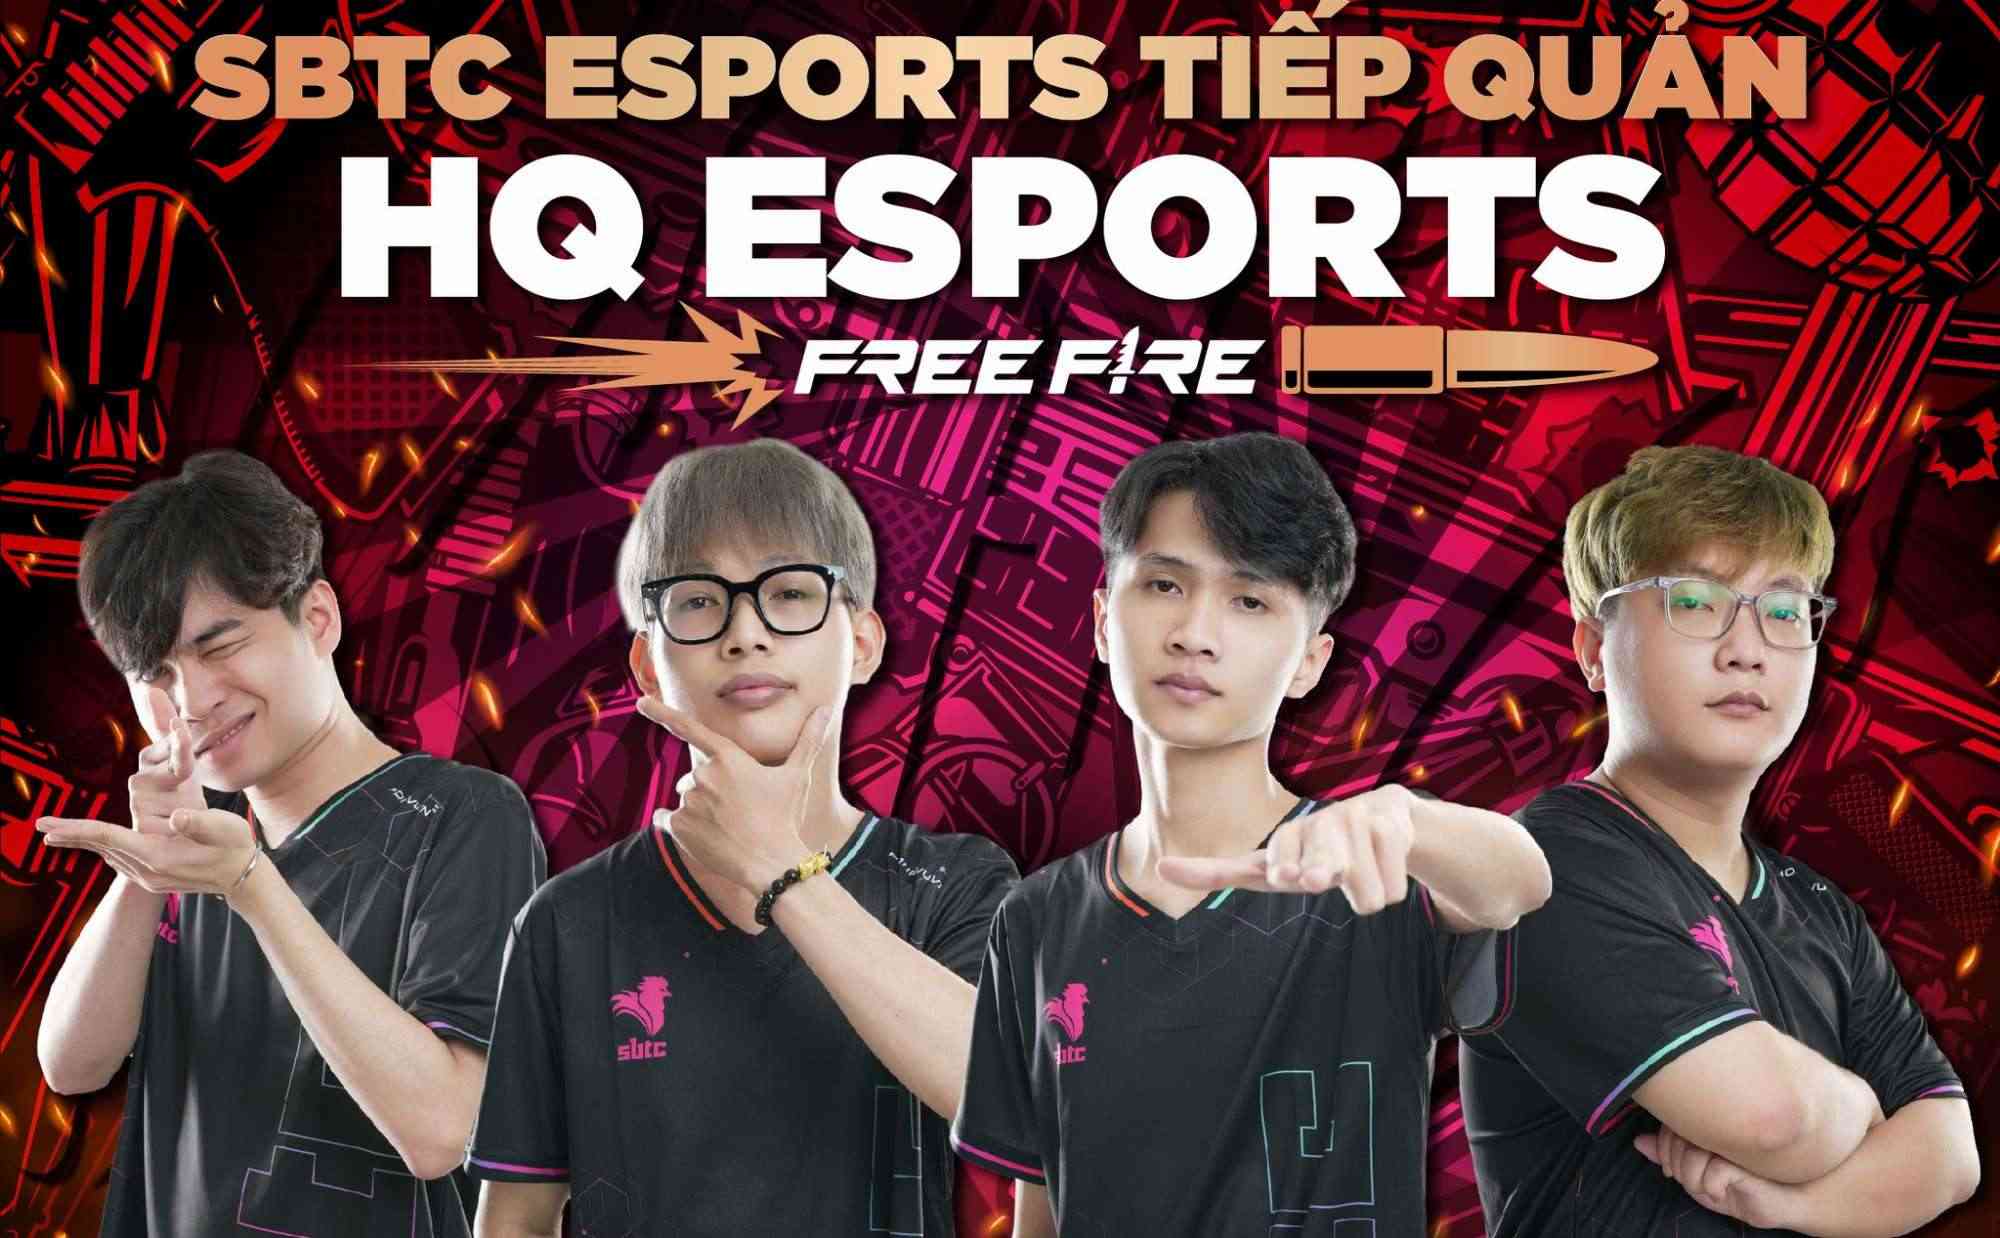 SBTC Esports officially entered Free Fire with the defending champion lineup of VFL